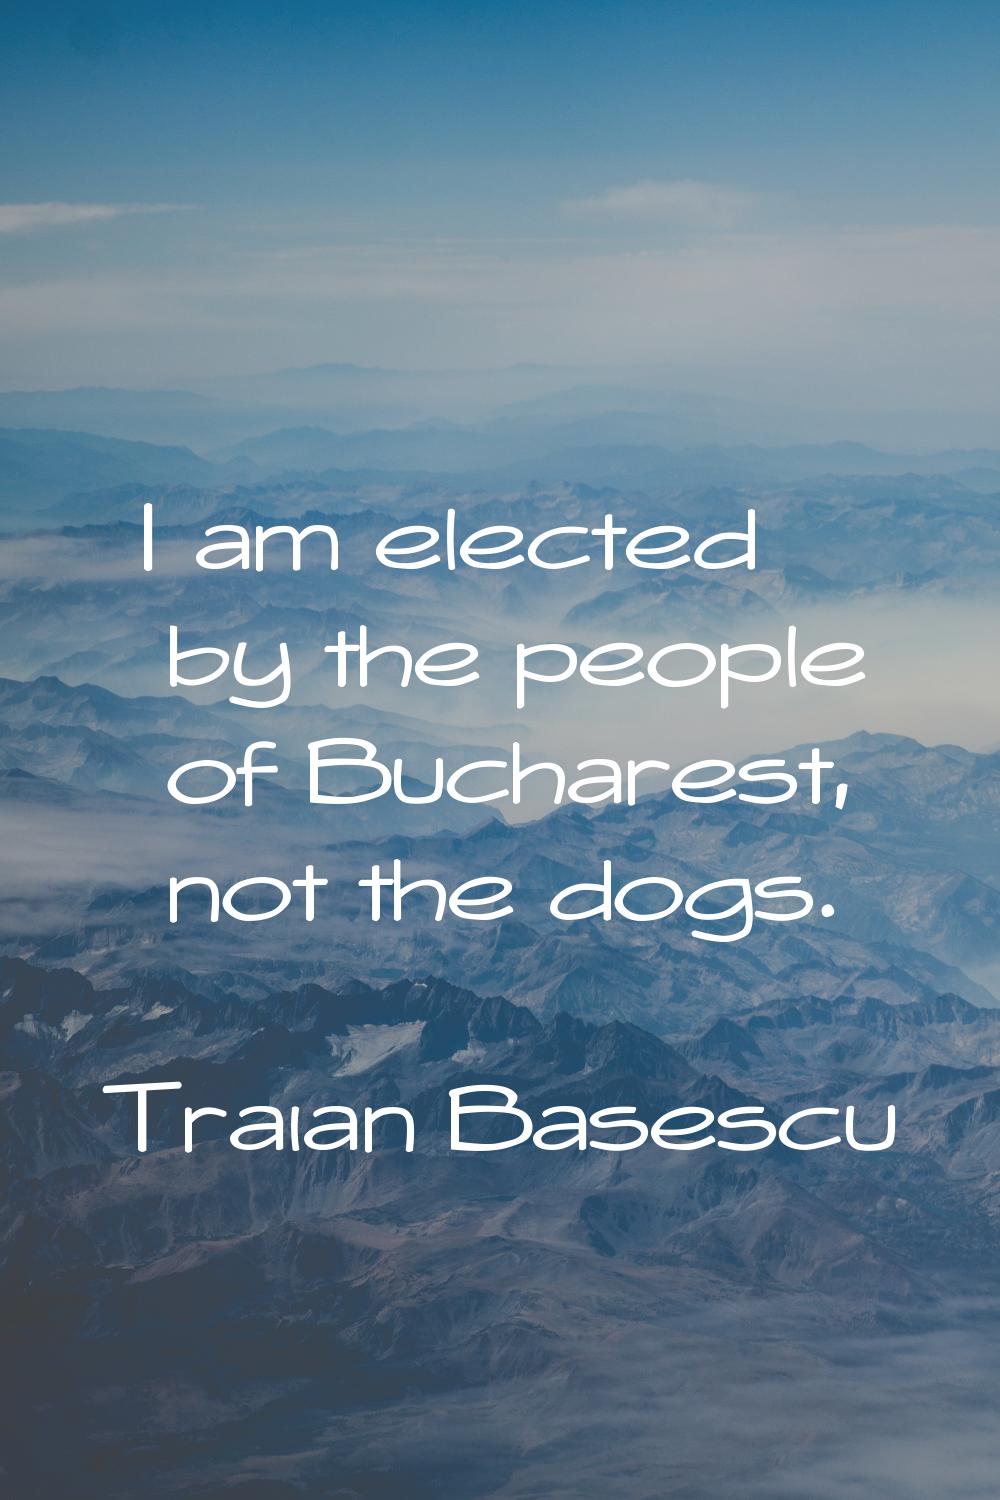 I am elected by the people of Bucharest, not the dogs.